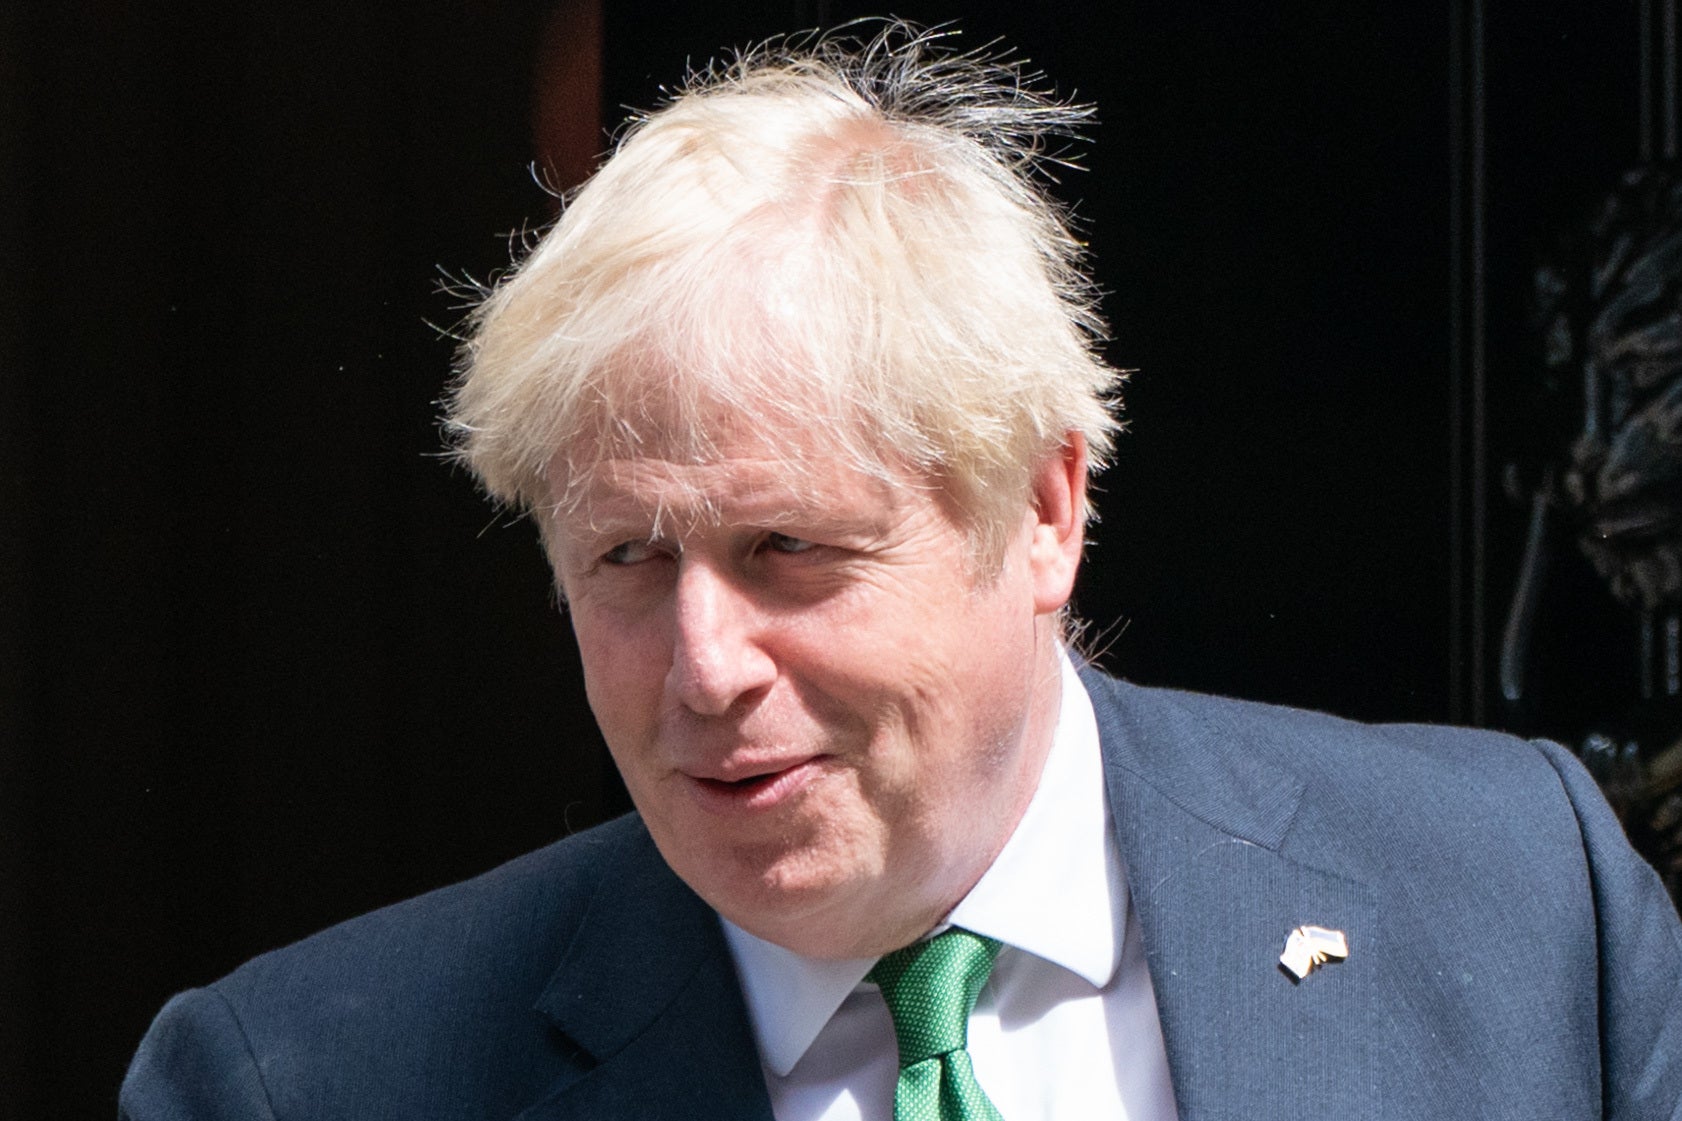 Prime Minister Boris Johnson did not receive questionnaires from Scotland Yard about two lockdown gatherings he attended (Dominic Lipinski/PA)